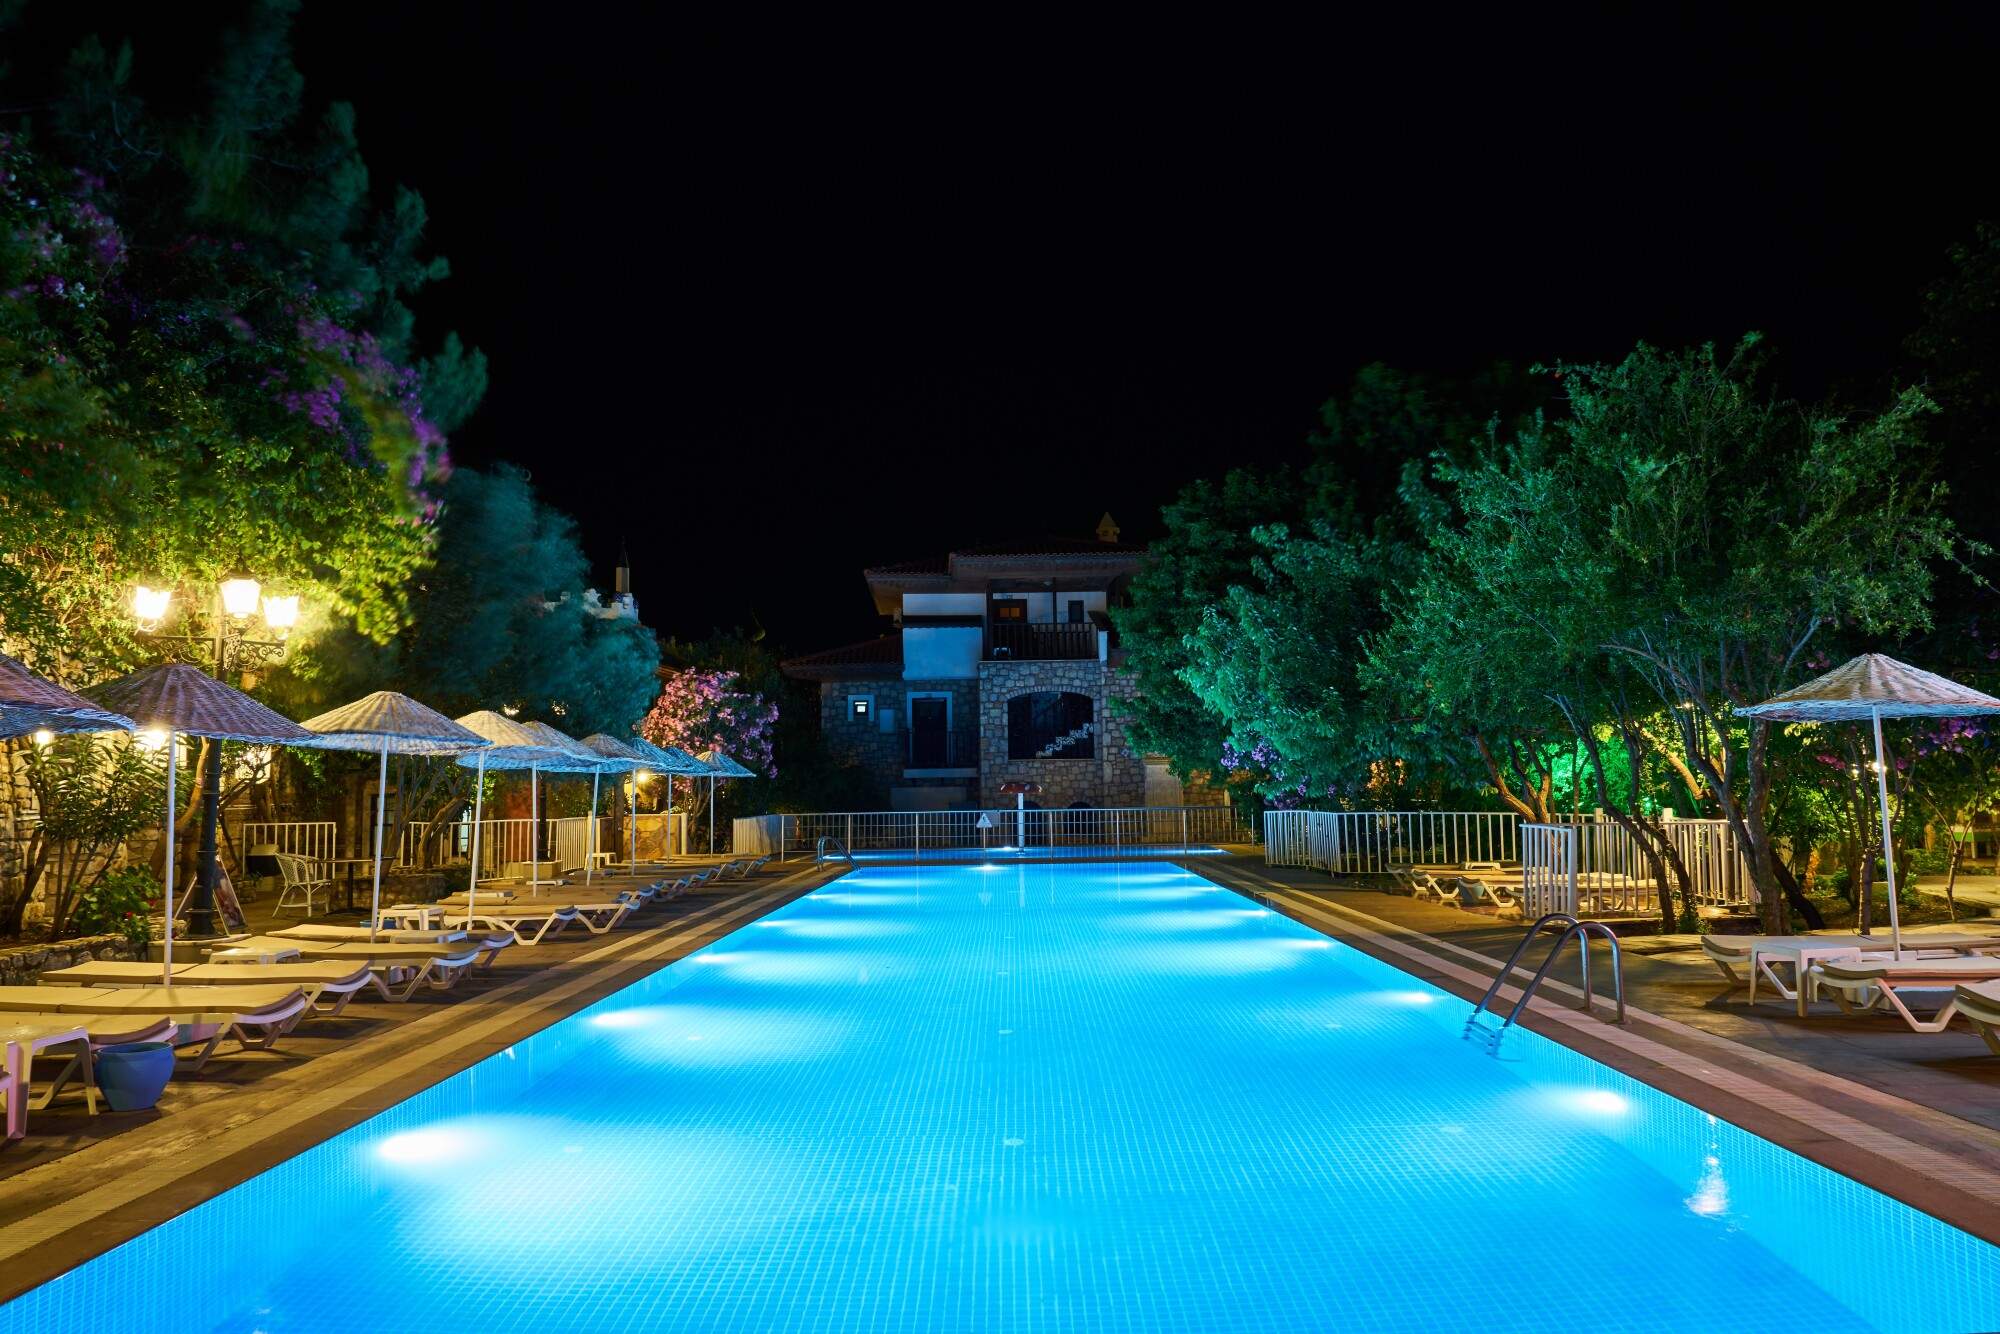 How to Choose the Right Pool Lighting